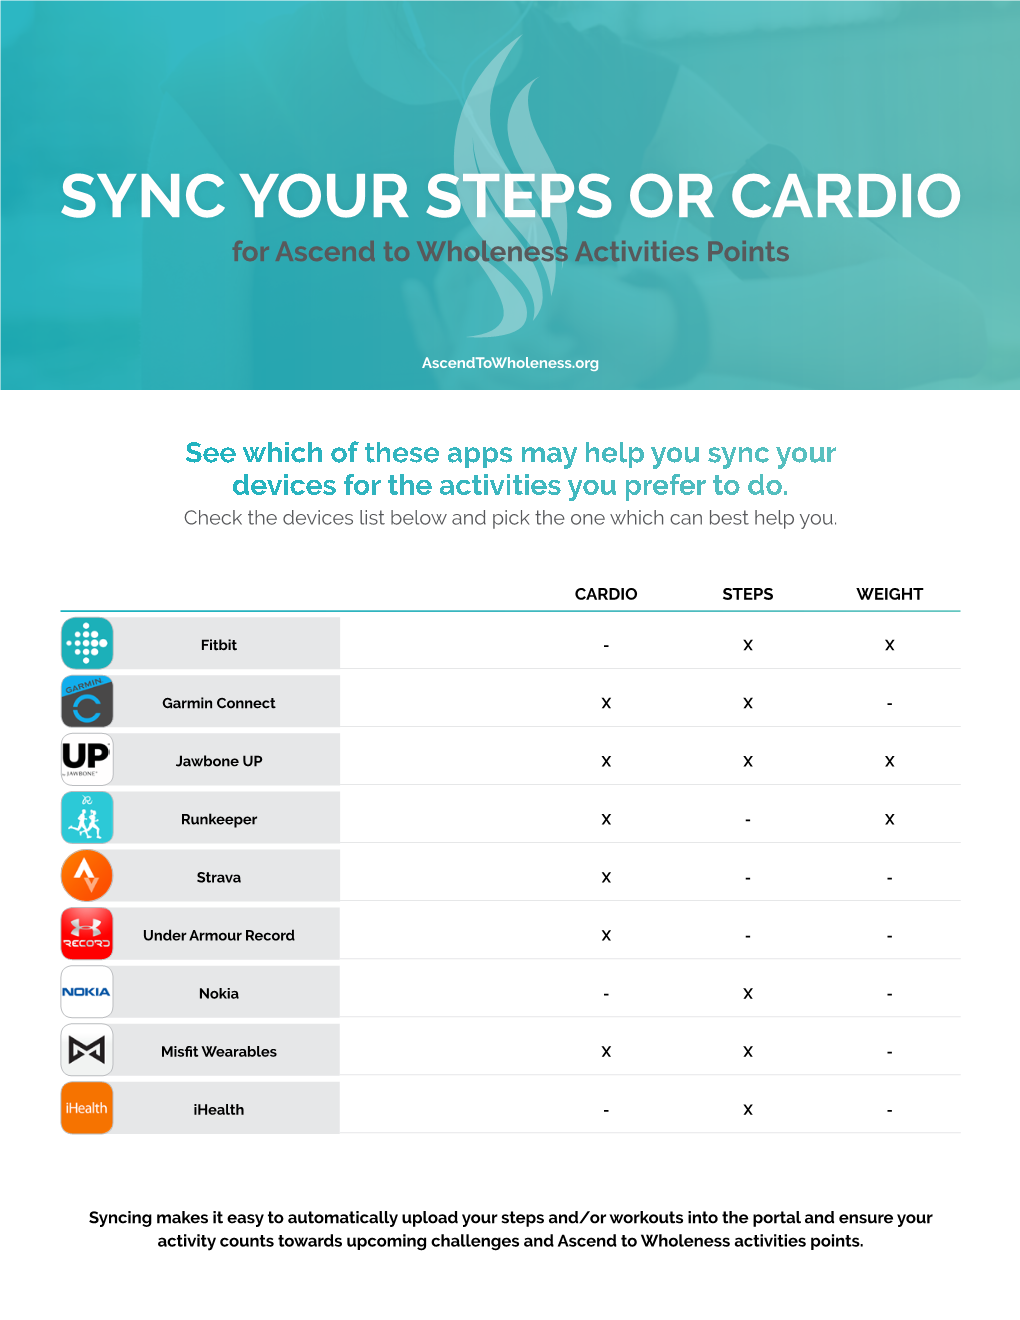 See Which of These Apps May Help You Sync Your Devices for the Activities You Prefer to Do